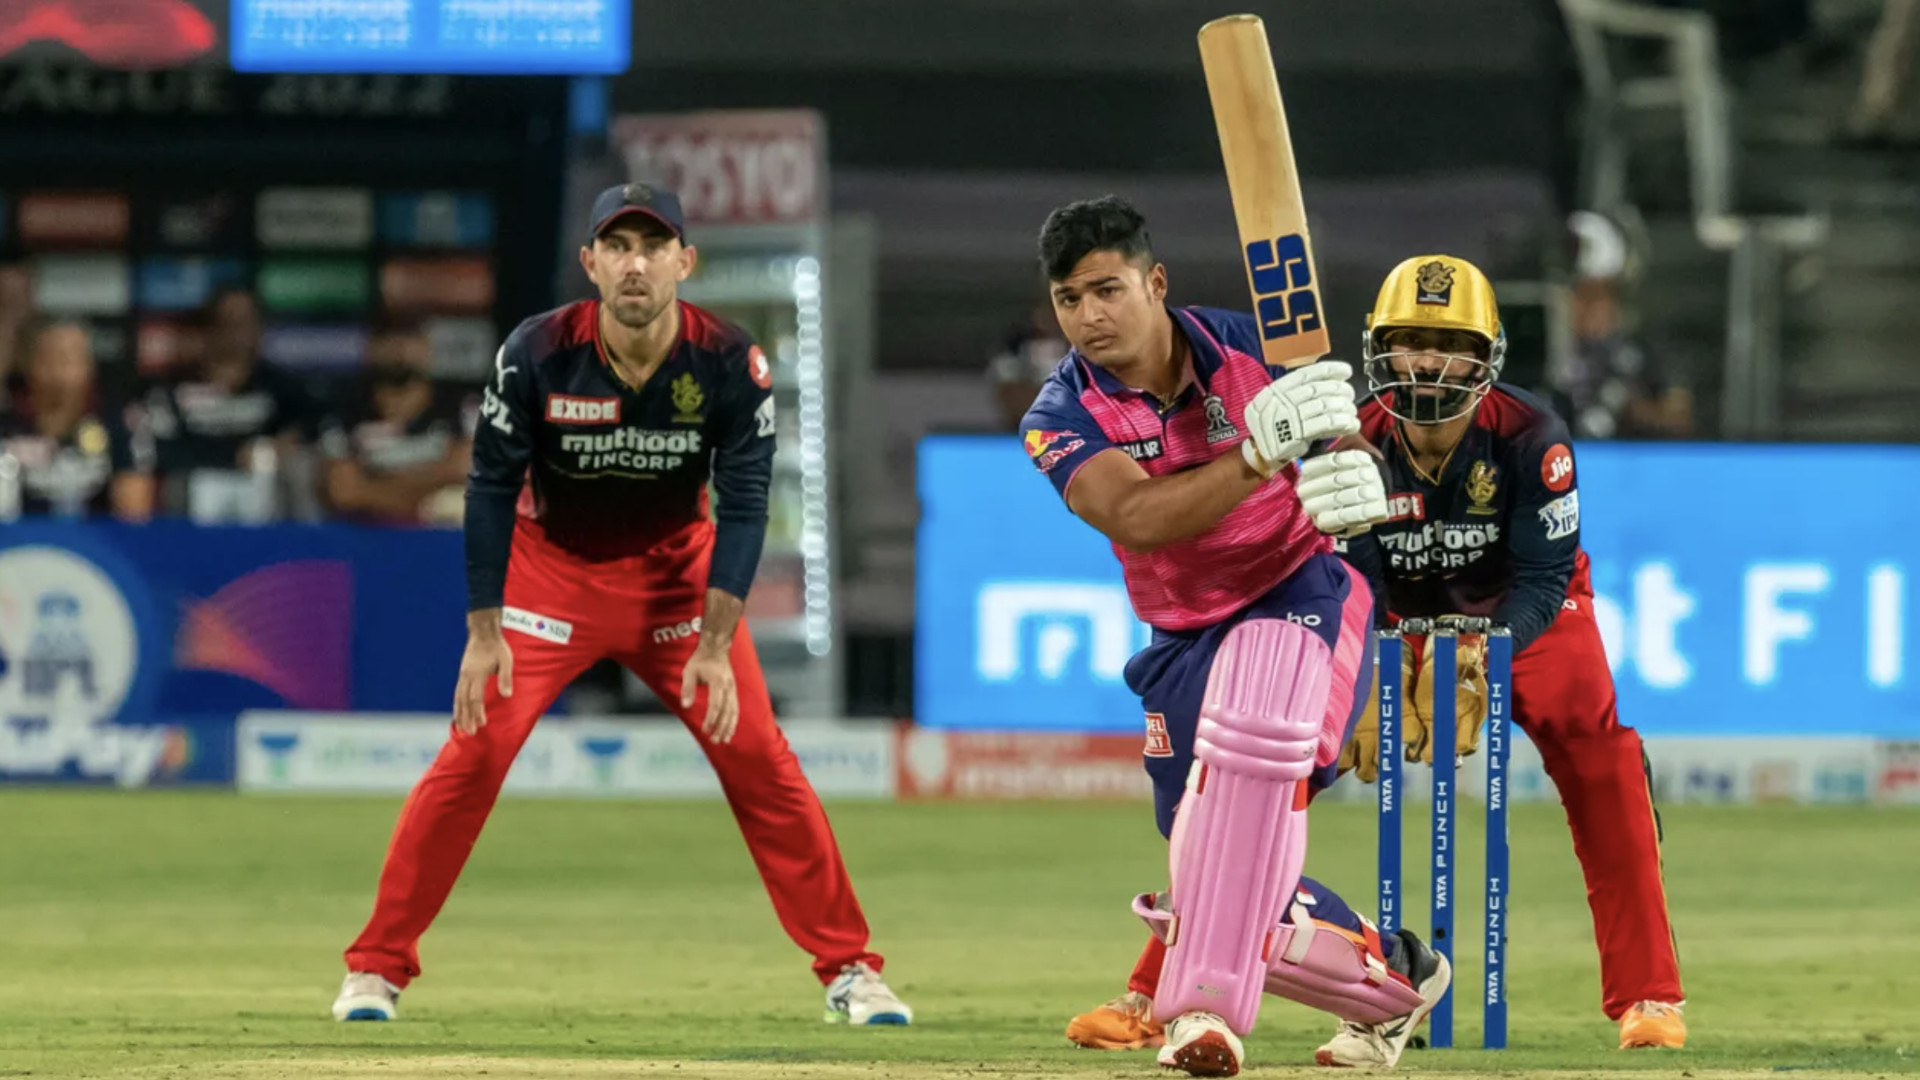 Rajasthan Royals vs Royal Challengers Bangalore live stream how to watch IPL playoff cricket from anywhere TechRadar